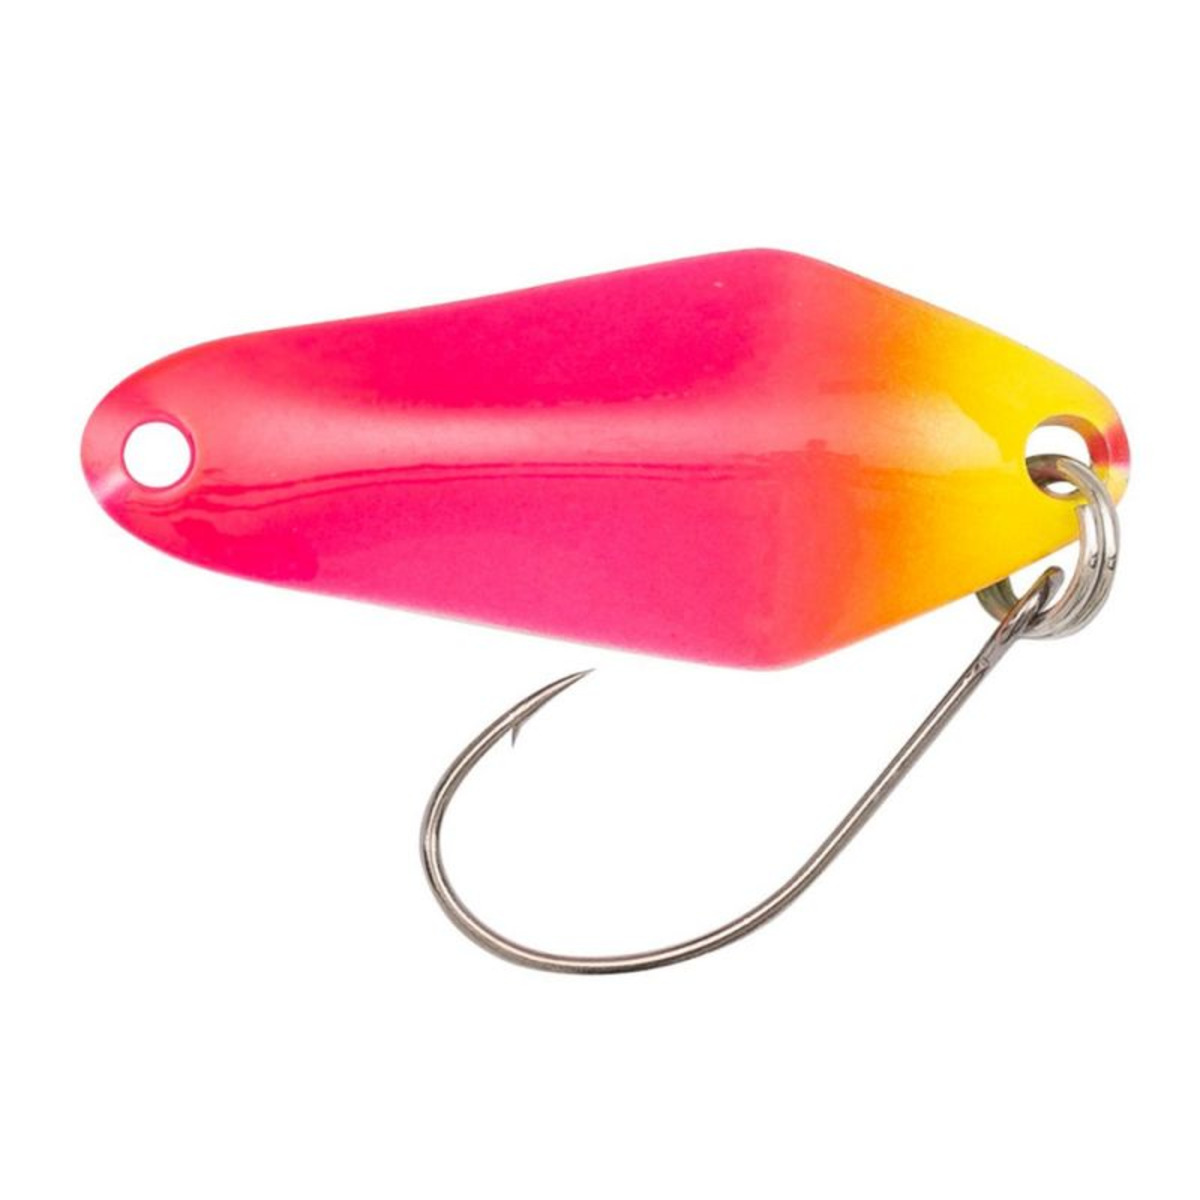 Berkley Area Game Spoons Chisai - 2.2 g - 2.5 cm - Chartreuse Front-Fucsia Back